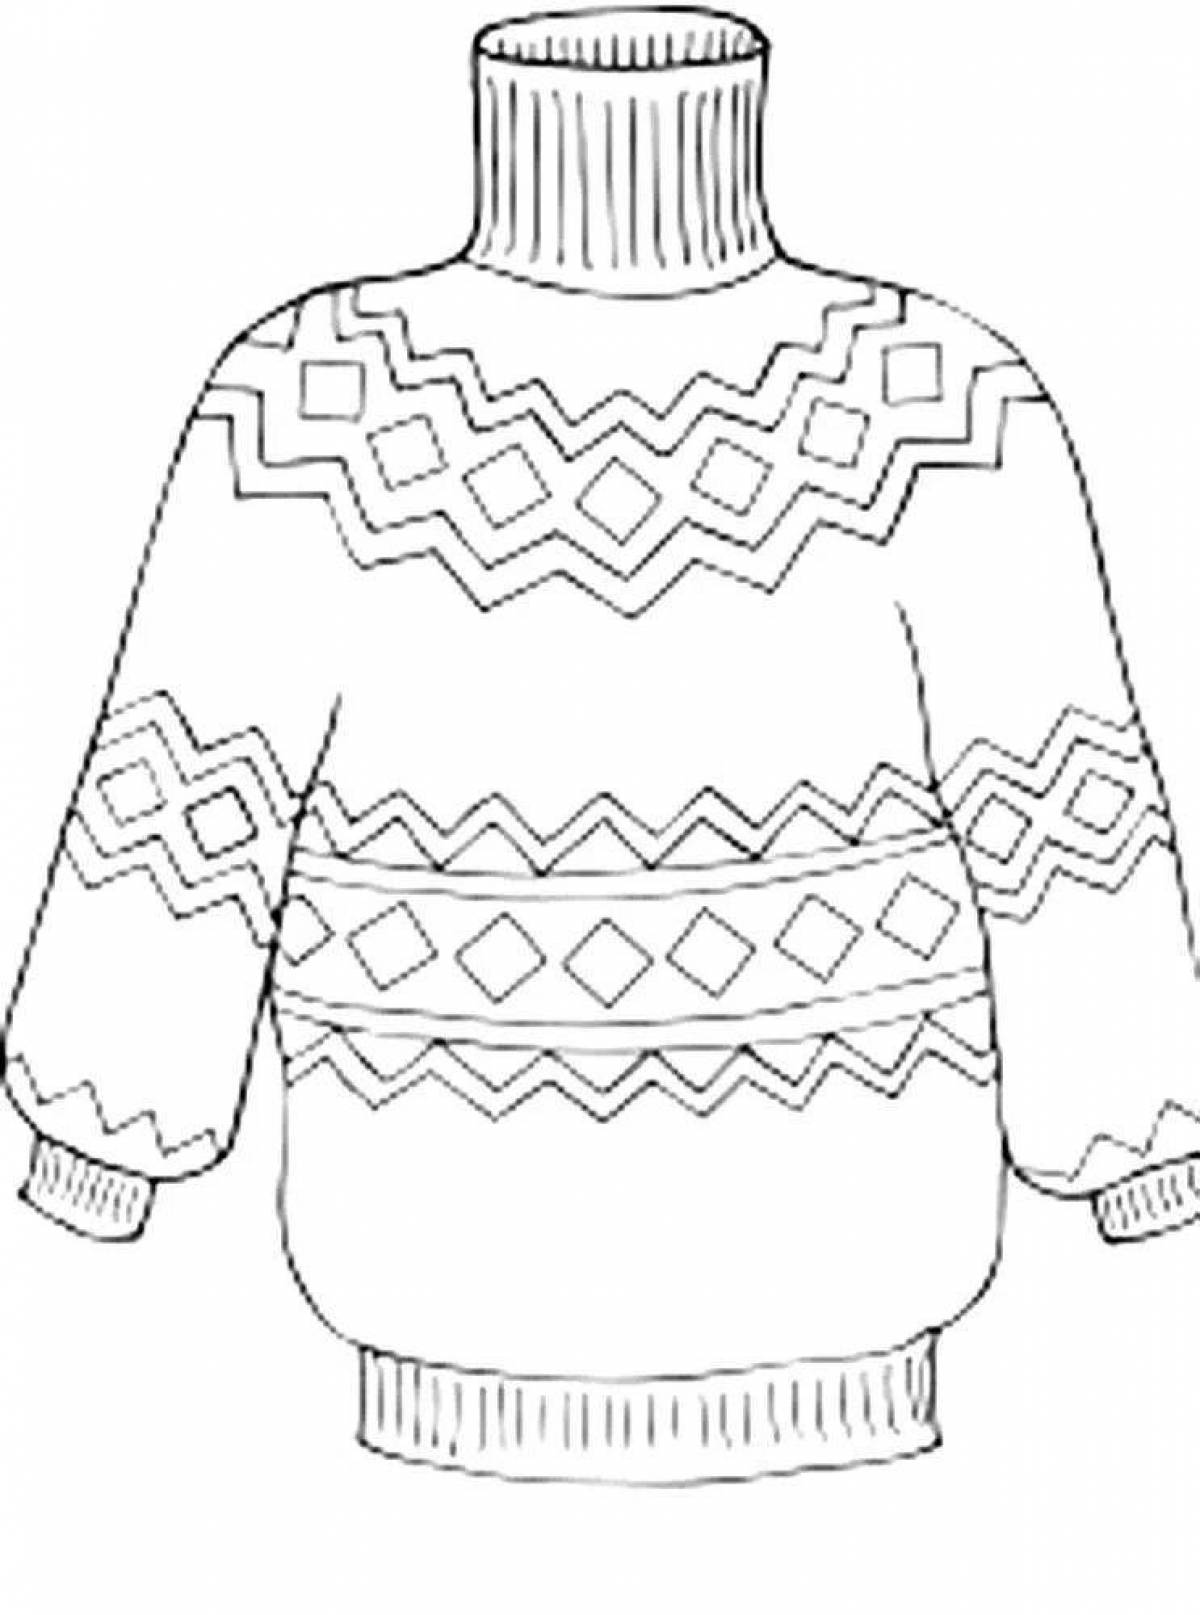 Glowing sweater coloring page for children 4-5 years old